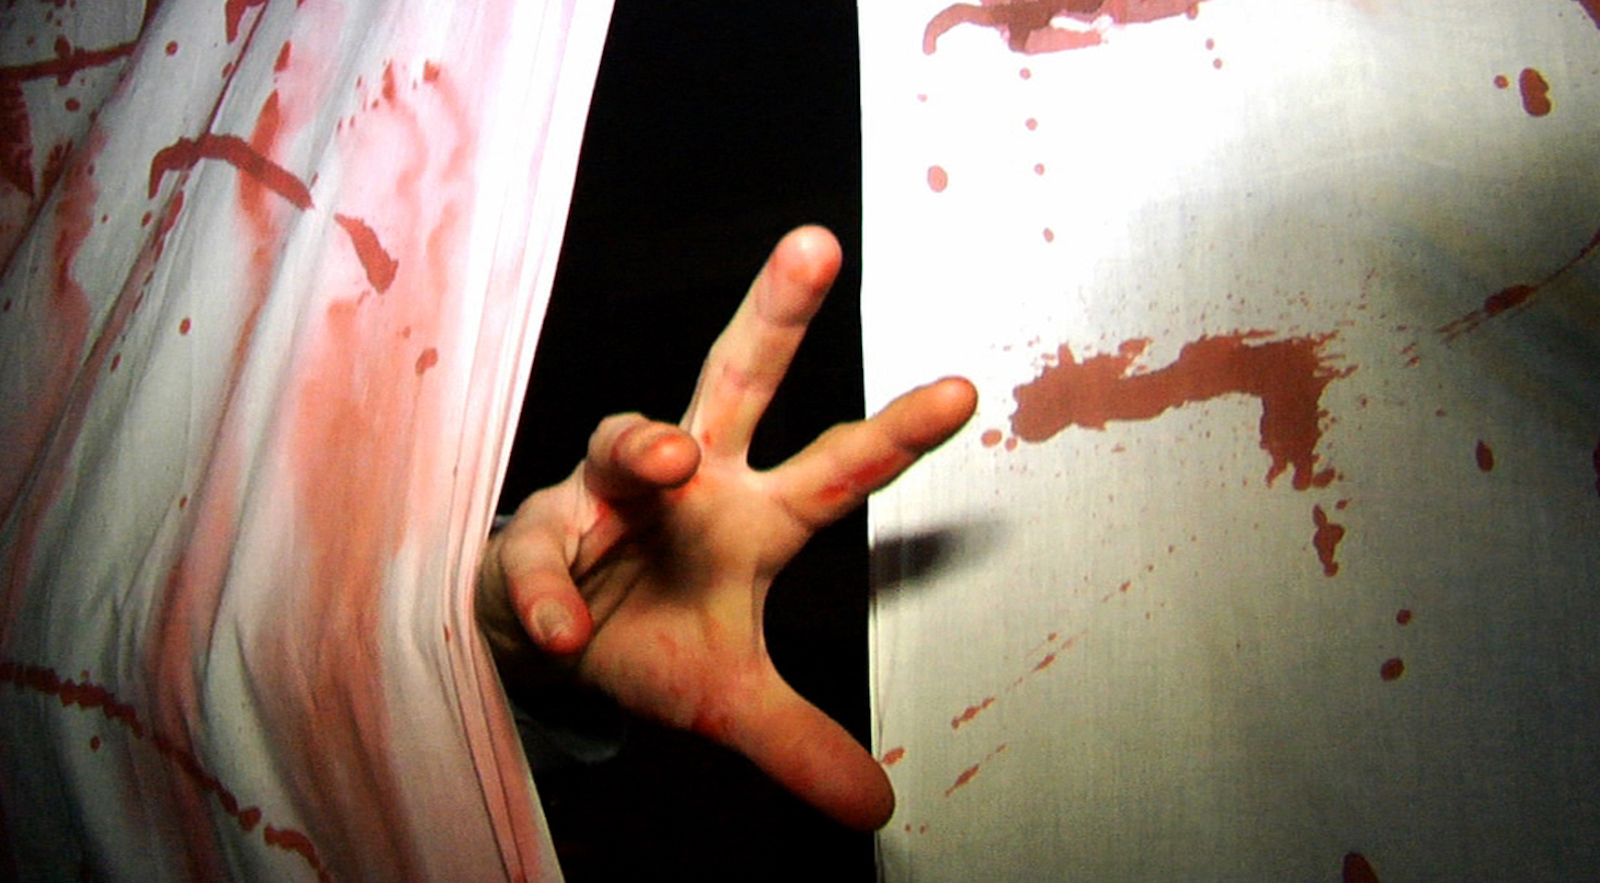 A hand reaching out from a bloody curtain in a haunted house